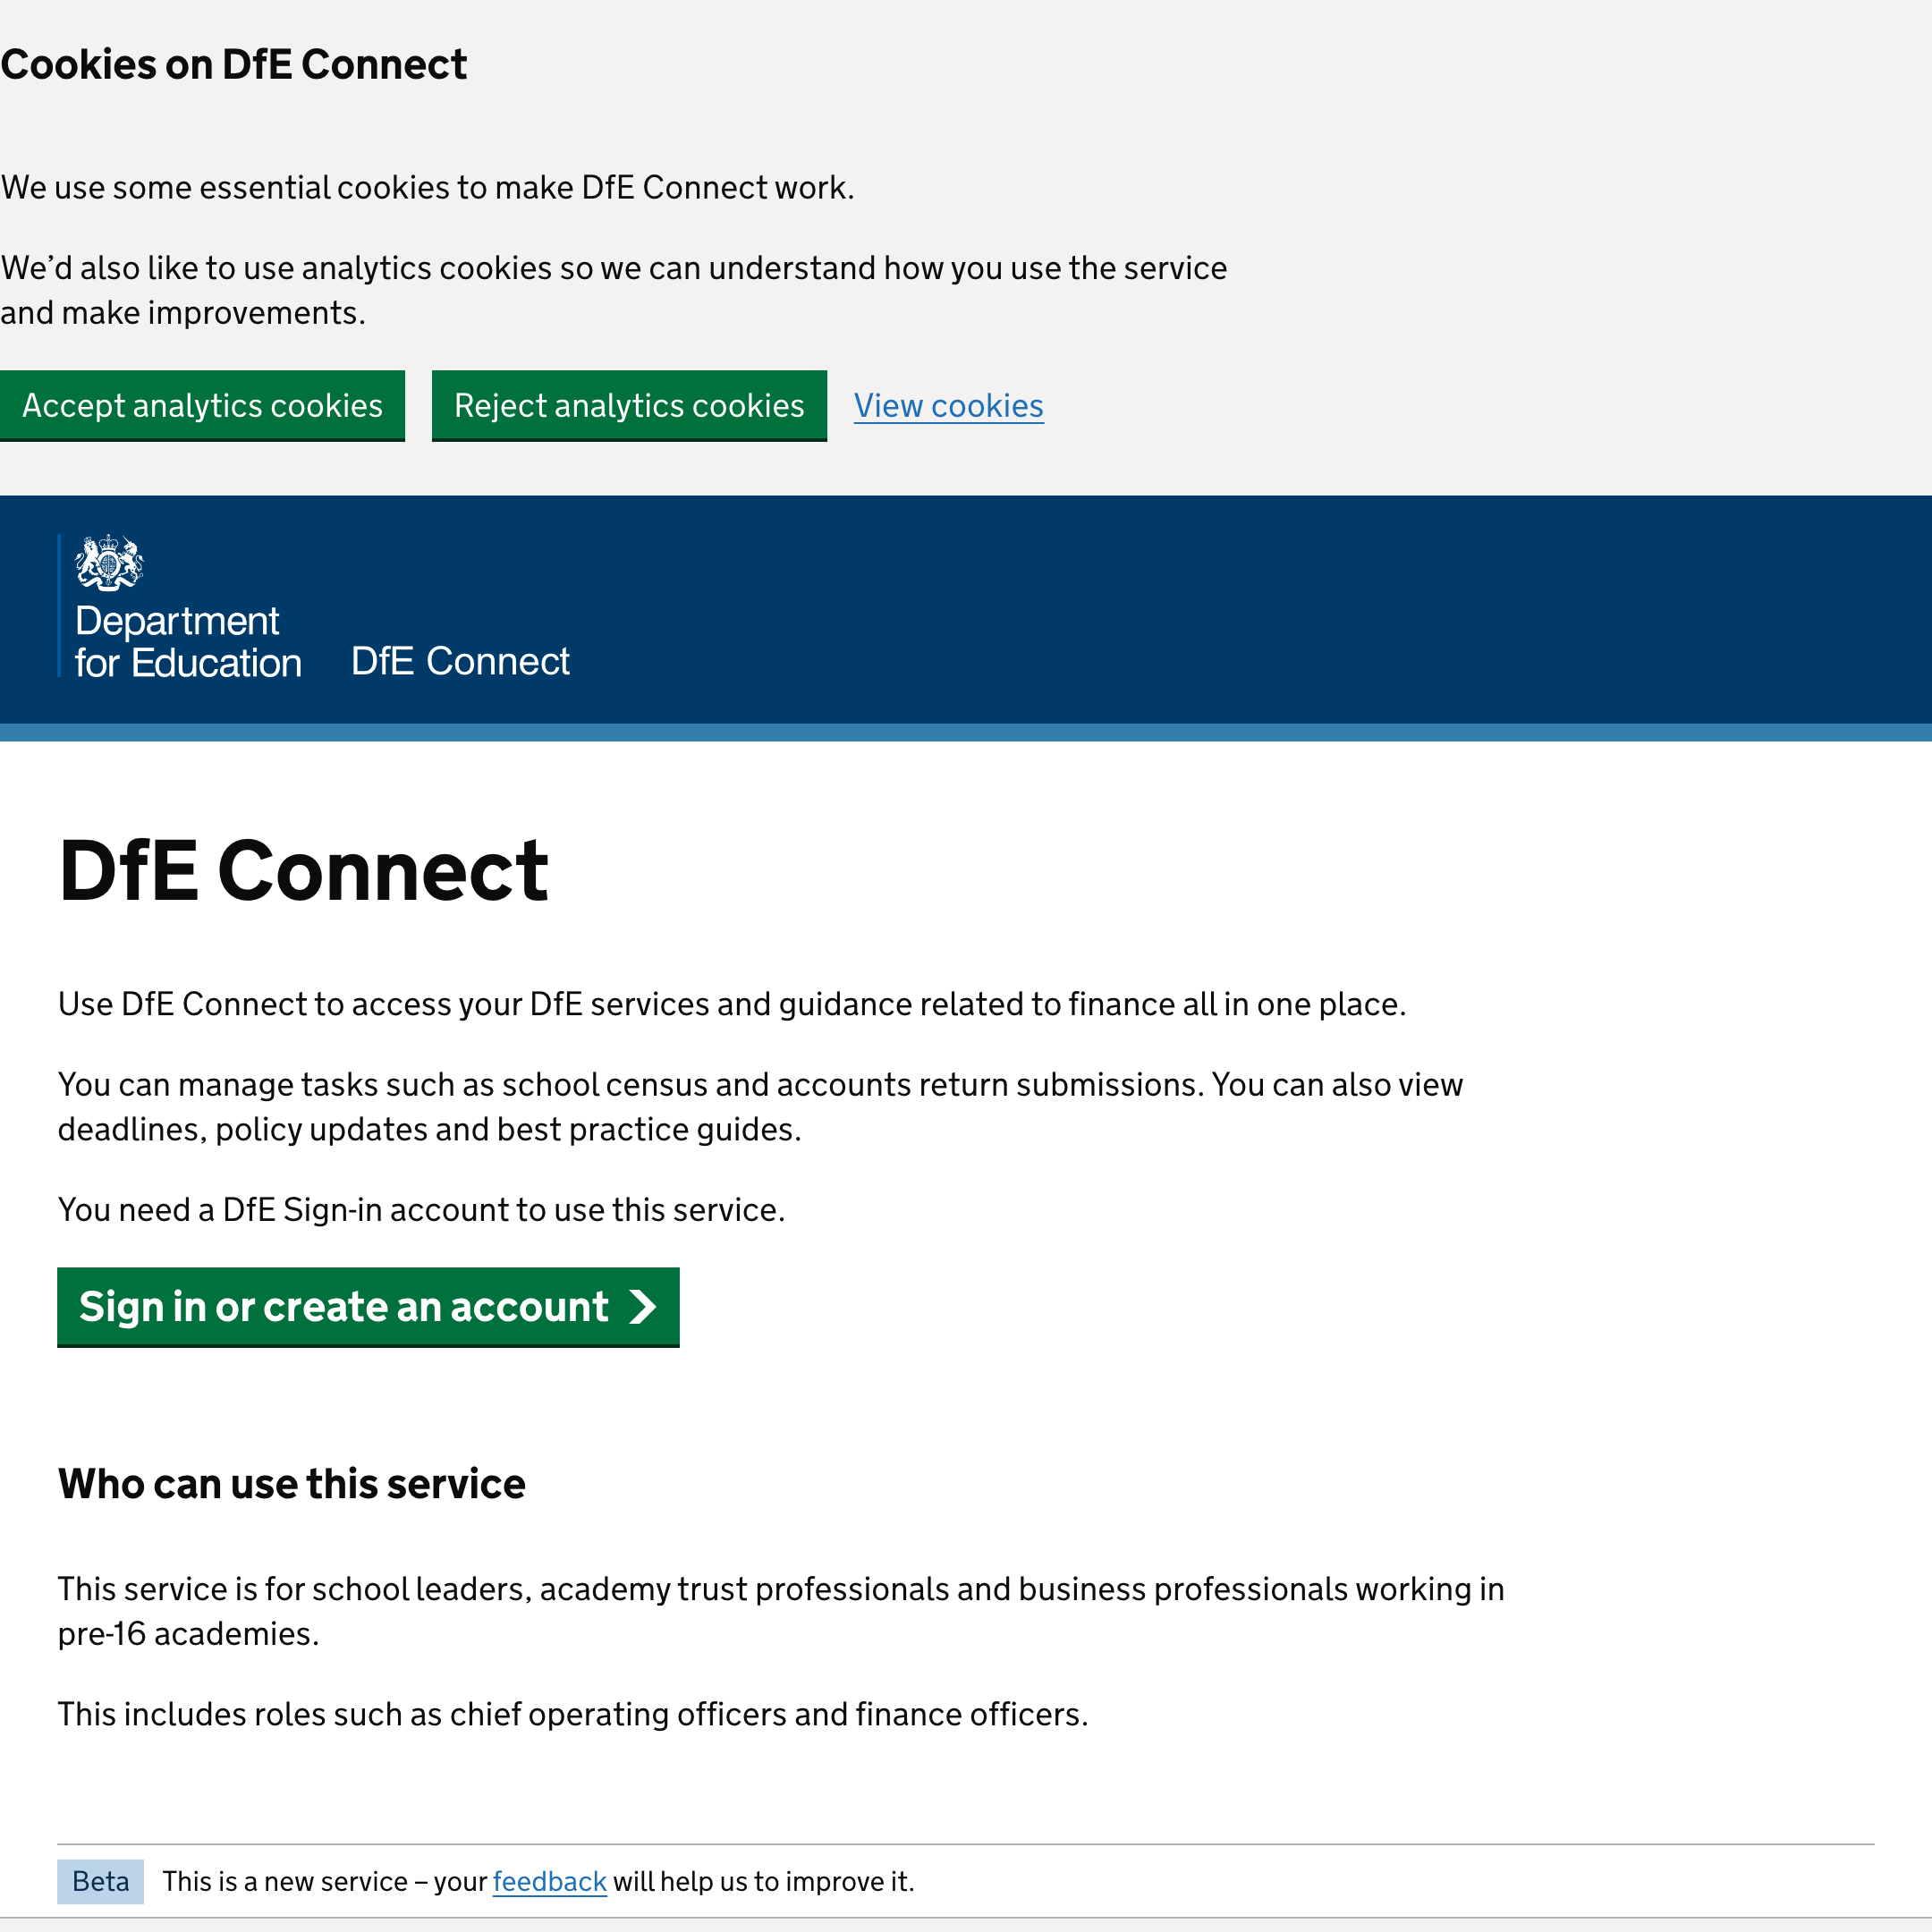 DfE Connect